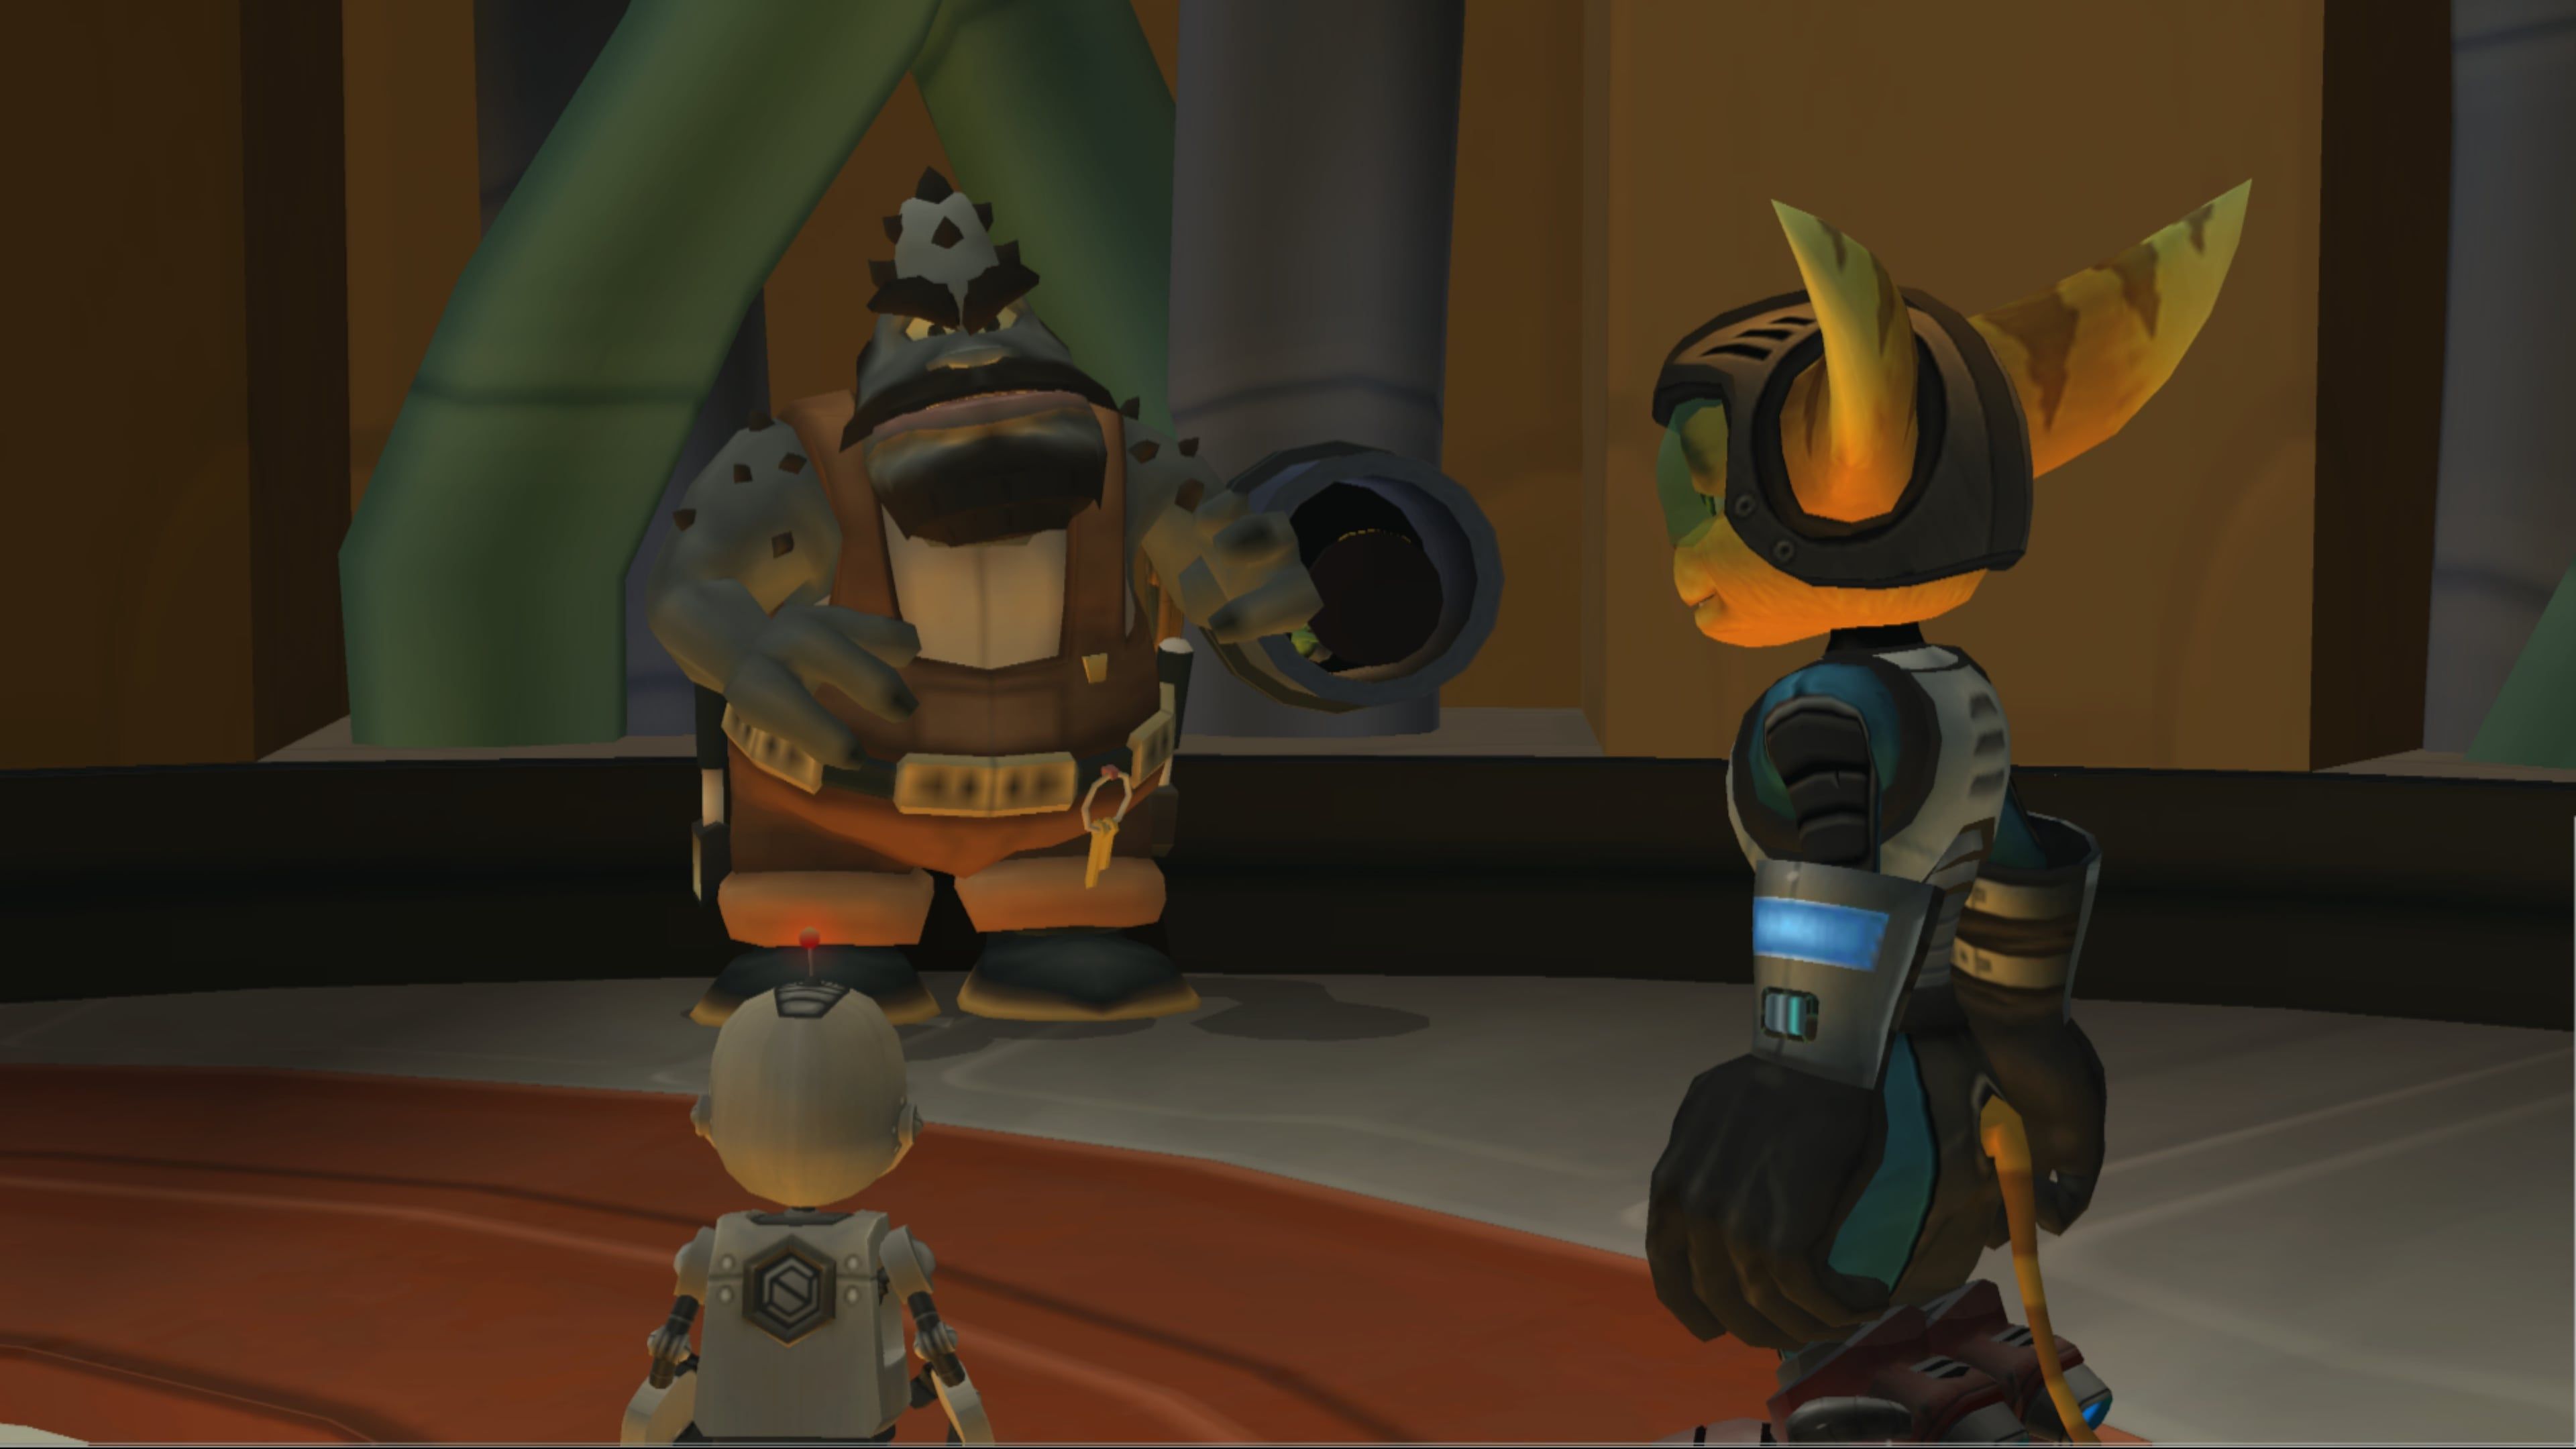 Ratchet And Clank: The Plumber arguing with Ratchet And Clank